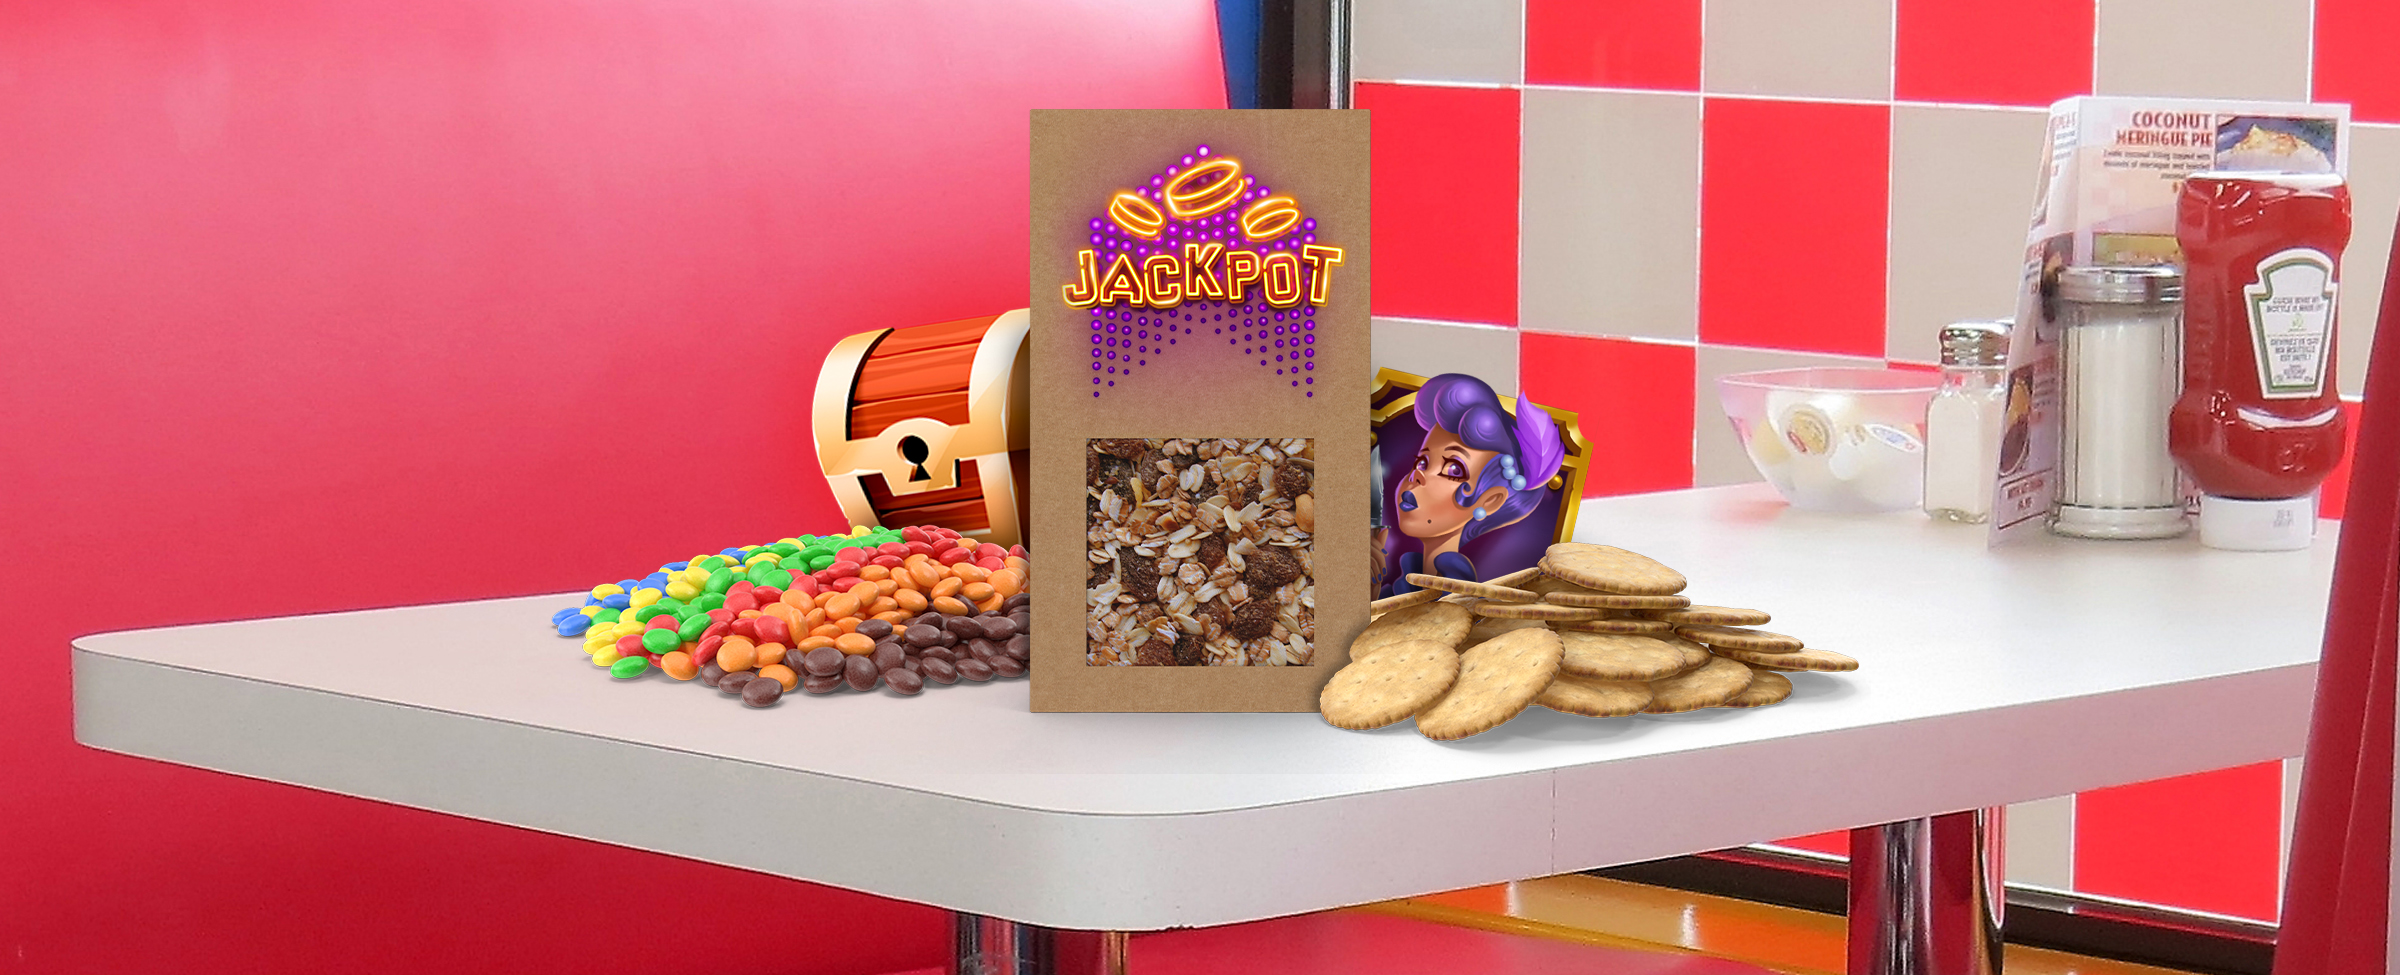 A cardboard packet of mixed nuts, with the word “jackpot” on top, sits on a white cafe counter, surrounded by cookies and candy. Either side of the packet are game icons from Cafe Casino slot games, including a 3D-animated treasure chest, and a female cartoon character with purple hair.